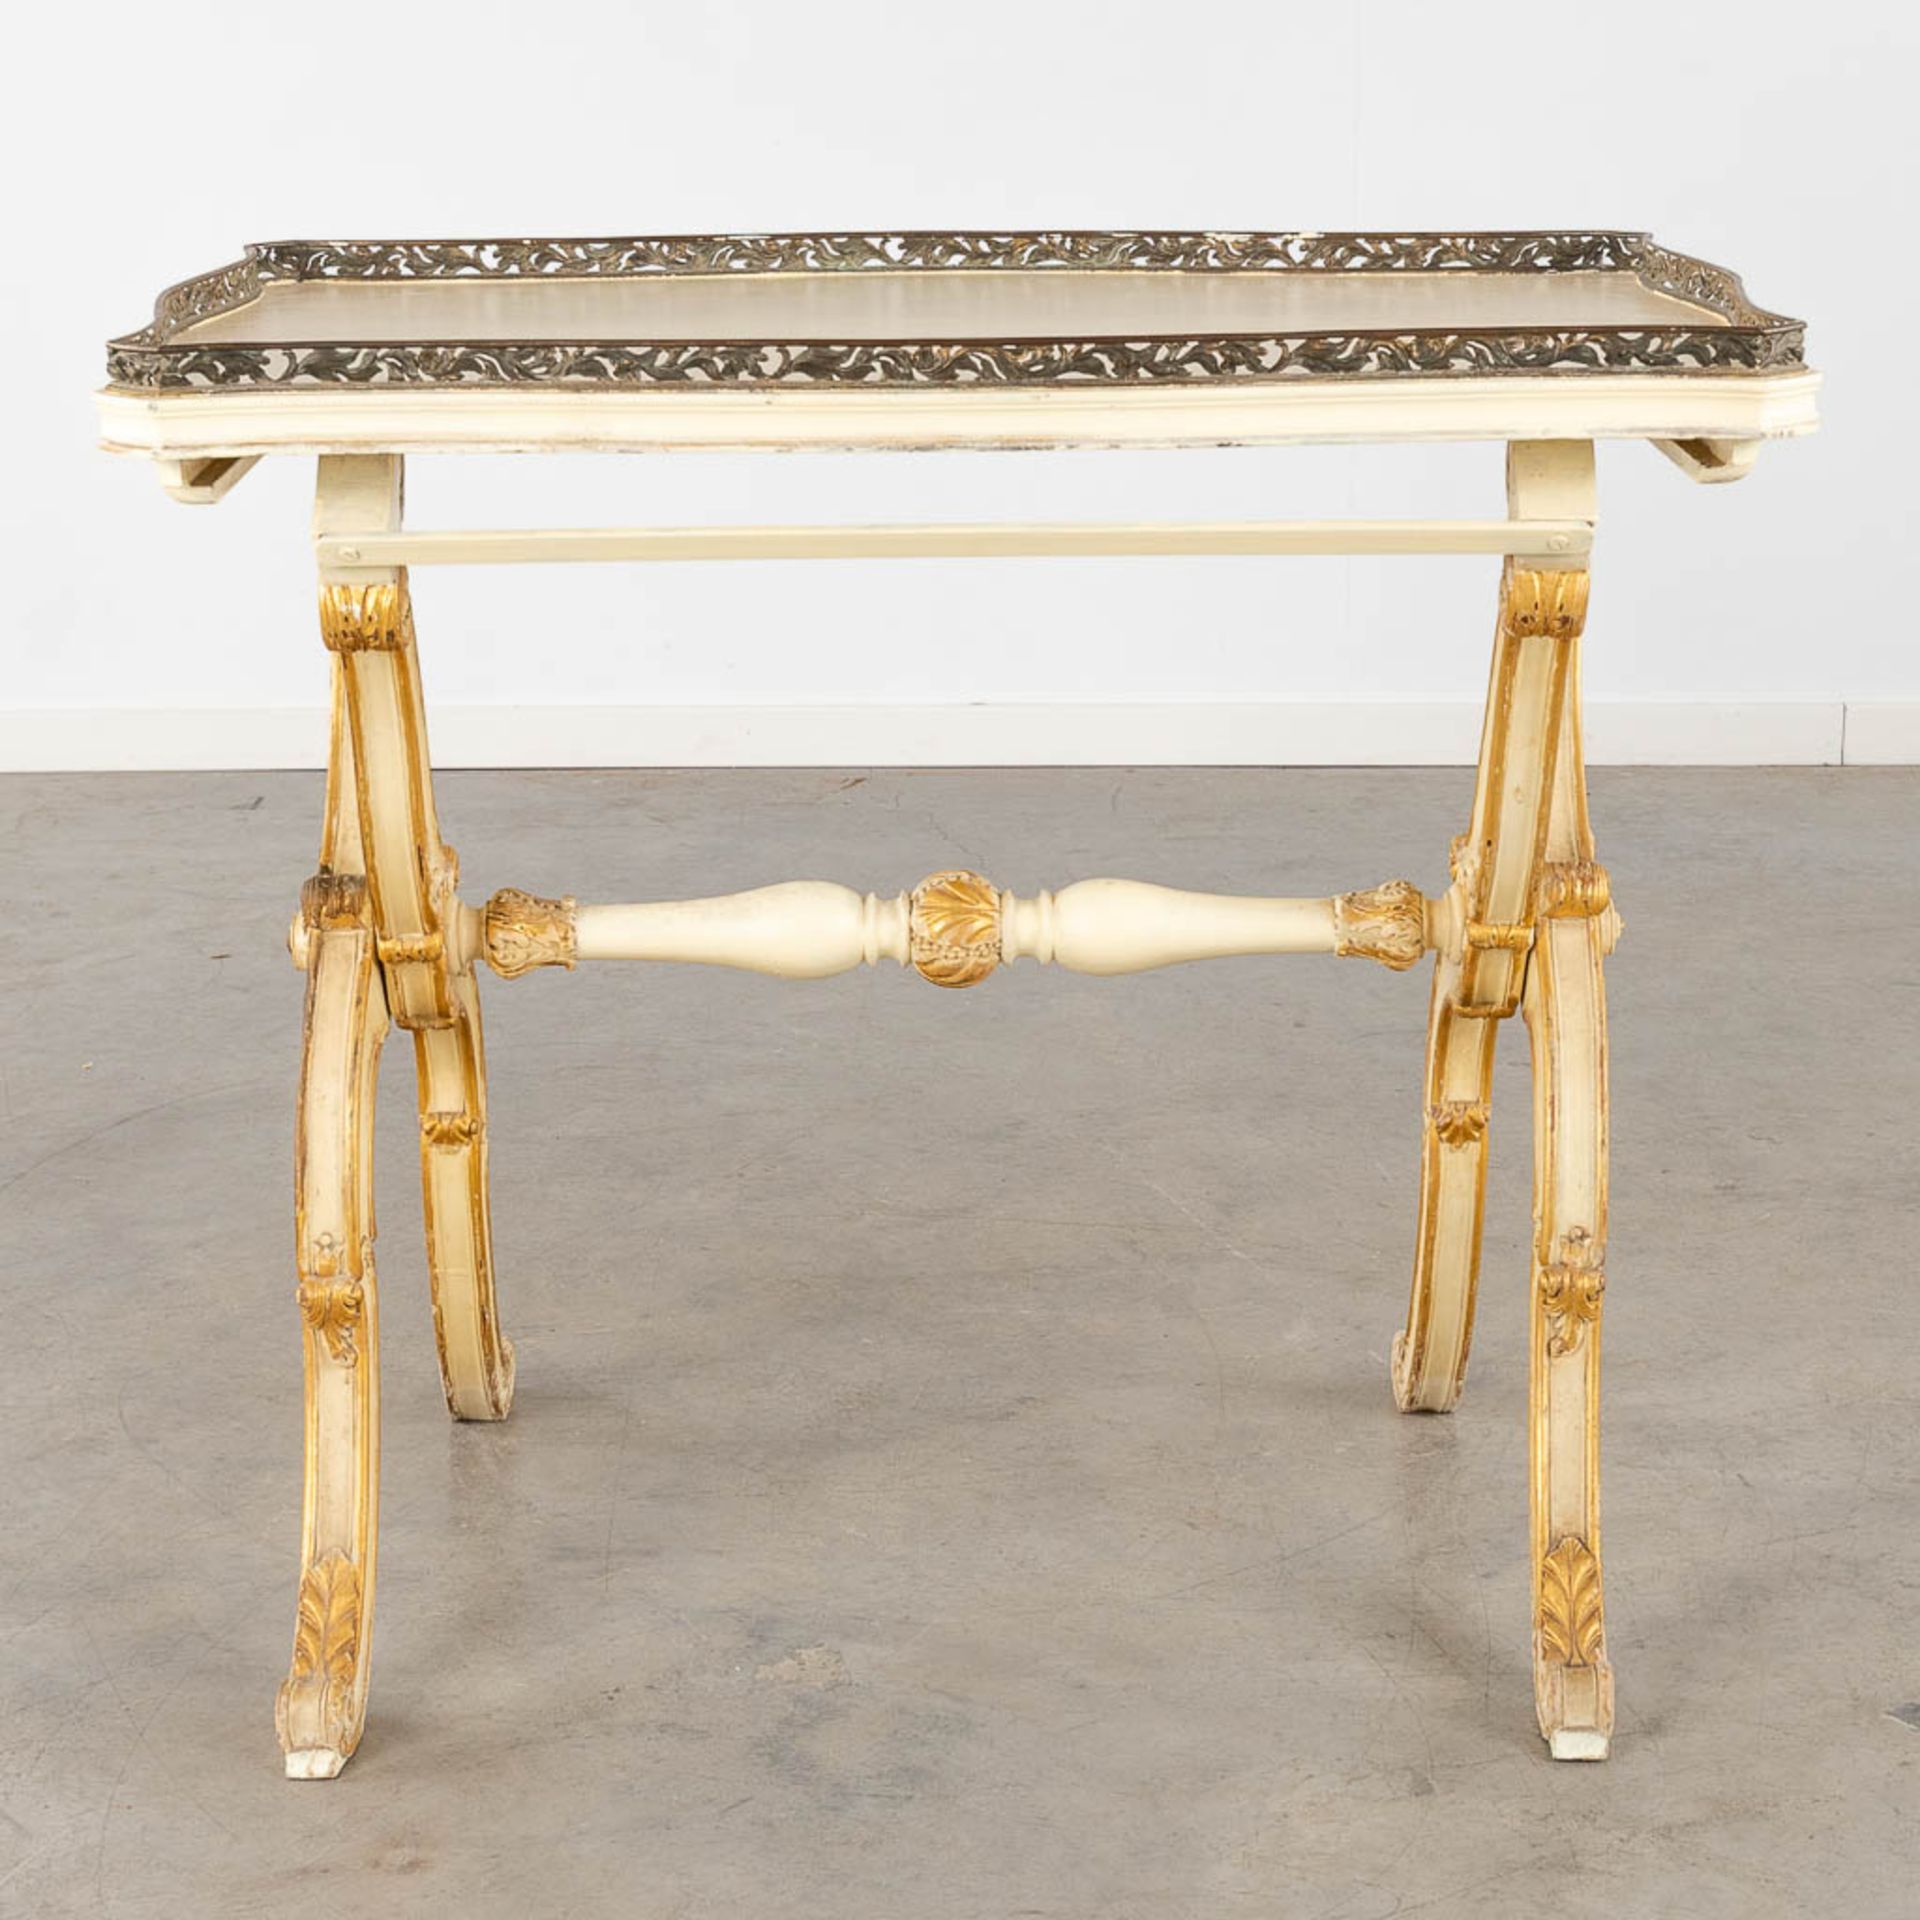 A serving table with bronze gallery, Italian style wood-sculptures. 19th C. (L:60 x W:89 x H:79 cm) - Bild 5 aus 14